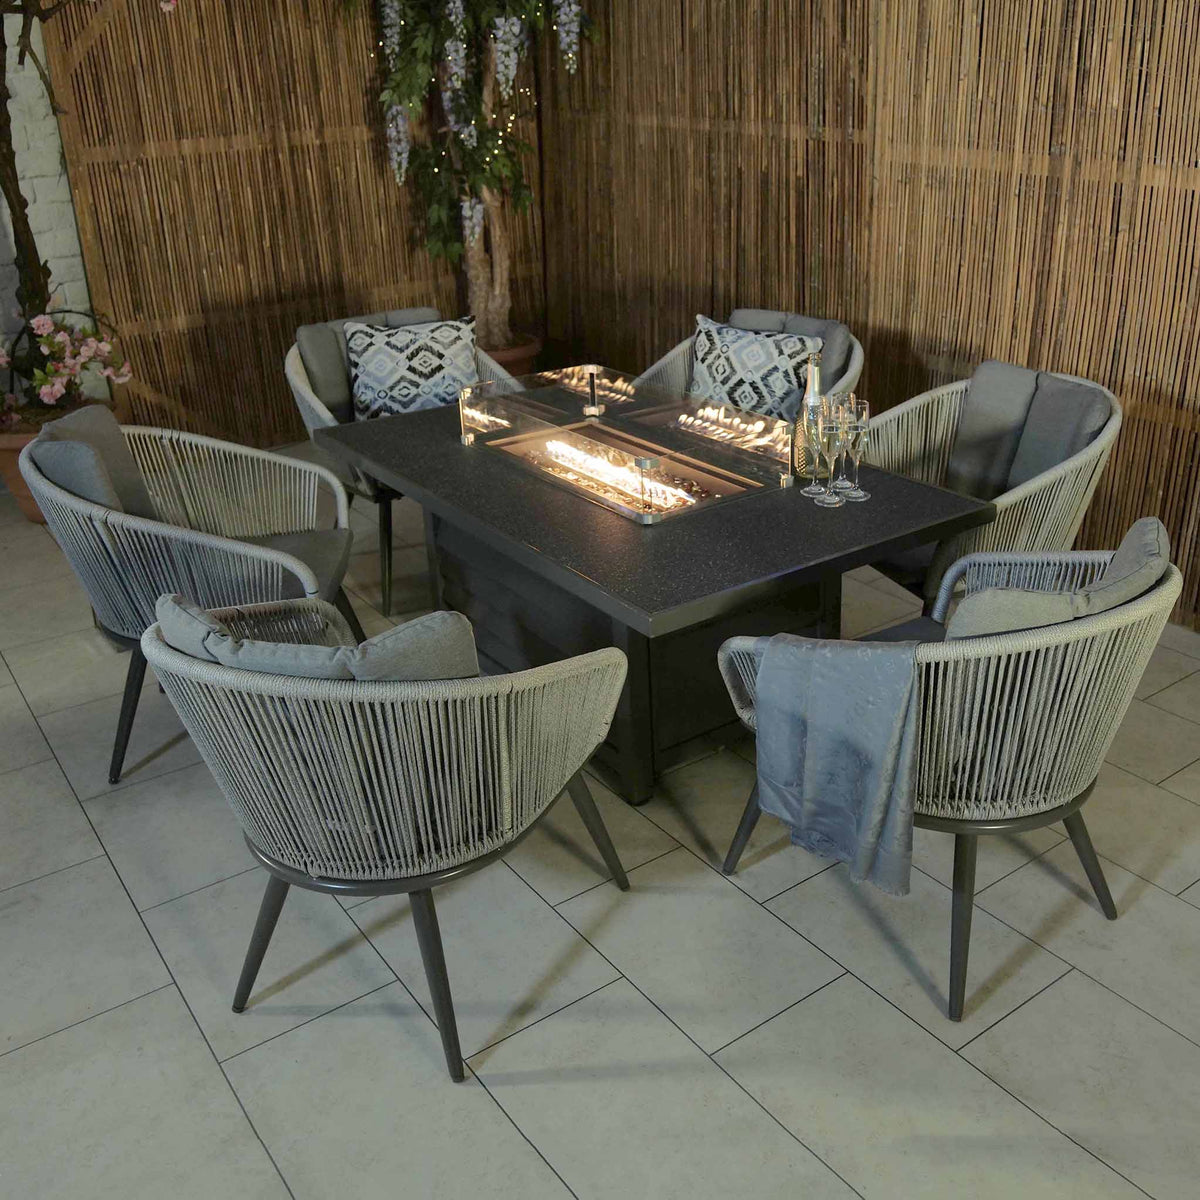 Aspen 6 Seater Fire Pit Table Garden Dining Set with 6 Chairs